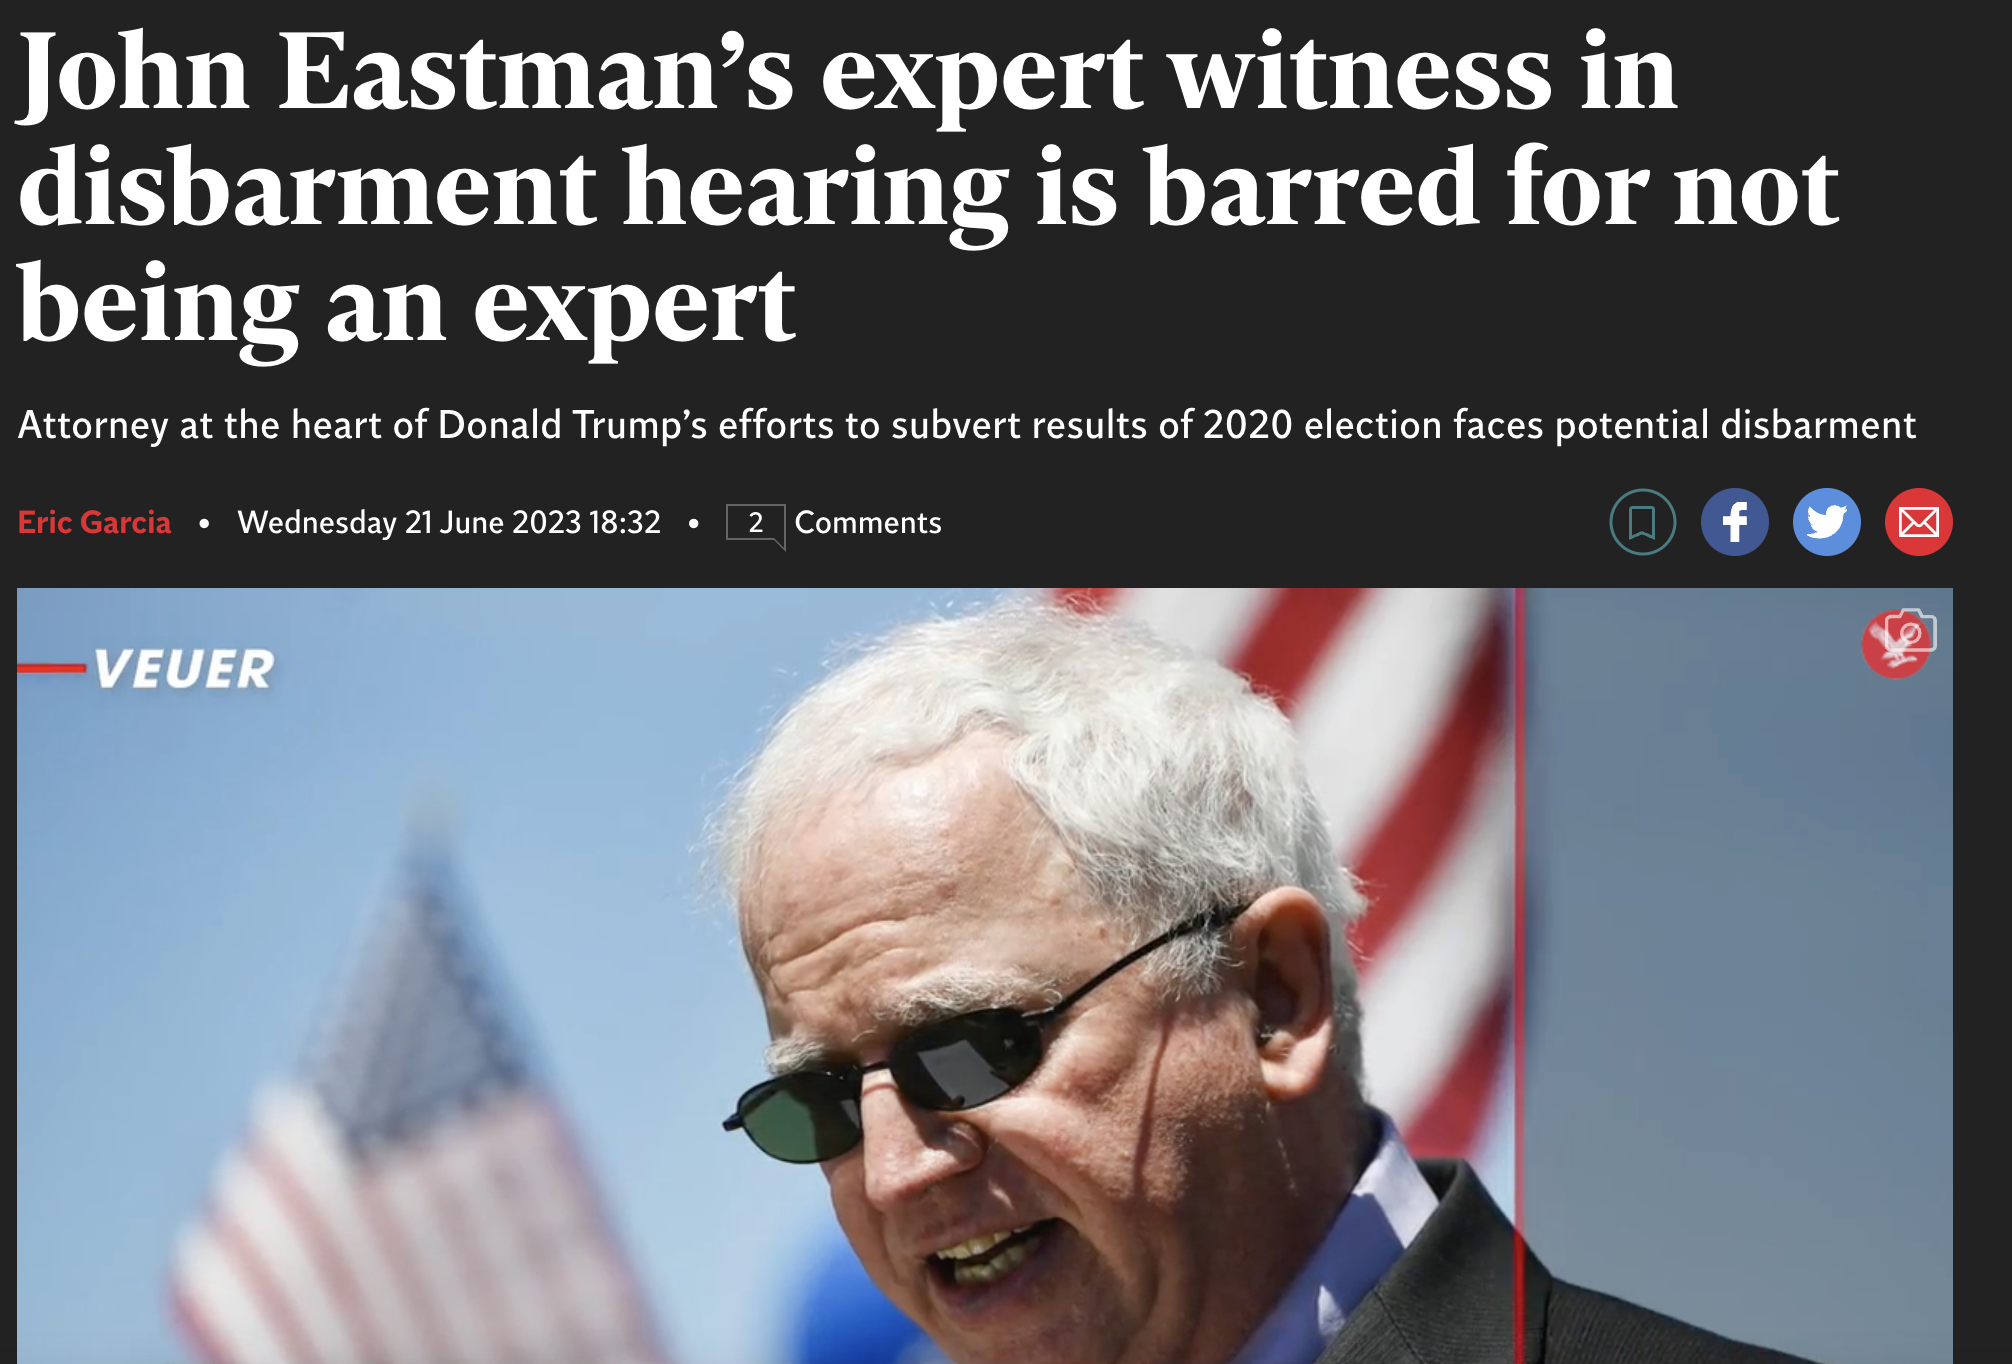 john eastman - John Eastman's expert witness in disbarment hearing is barred for not being an expert Attorney at the heart of Donald Trump's efforts to subvert results of 2020 election faces potential disbarment Eric Garcia Wednesday 2 Veuer f